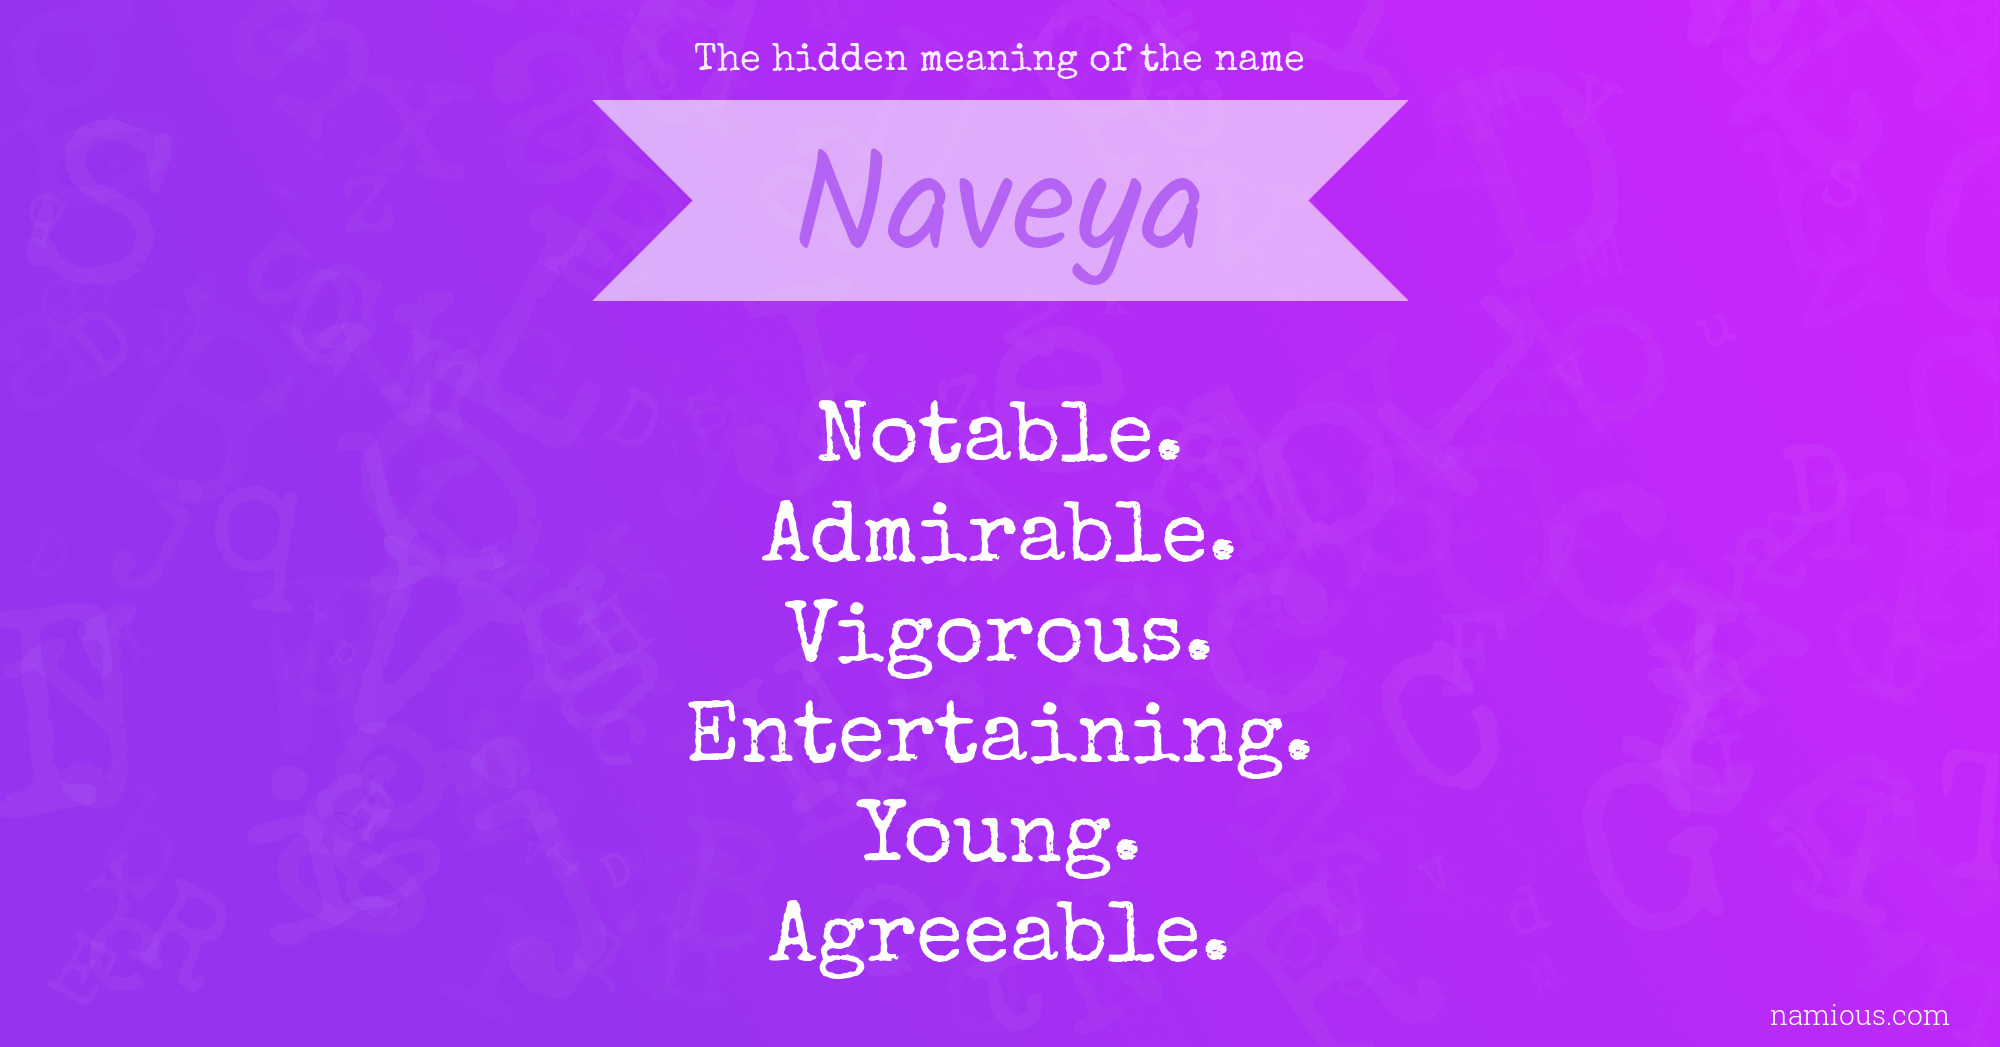 The hidden meaning of the name Naveya